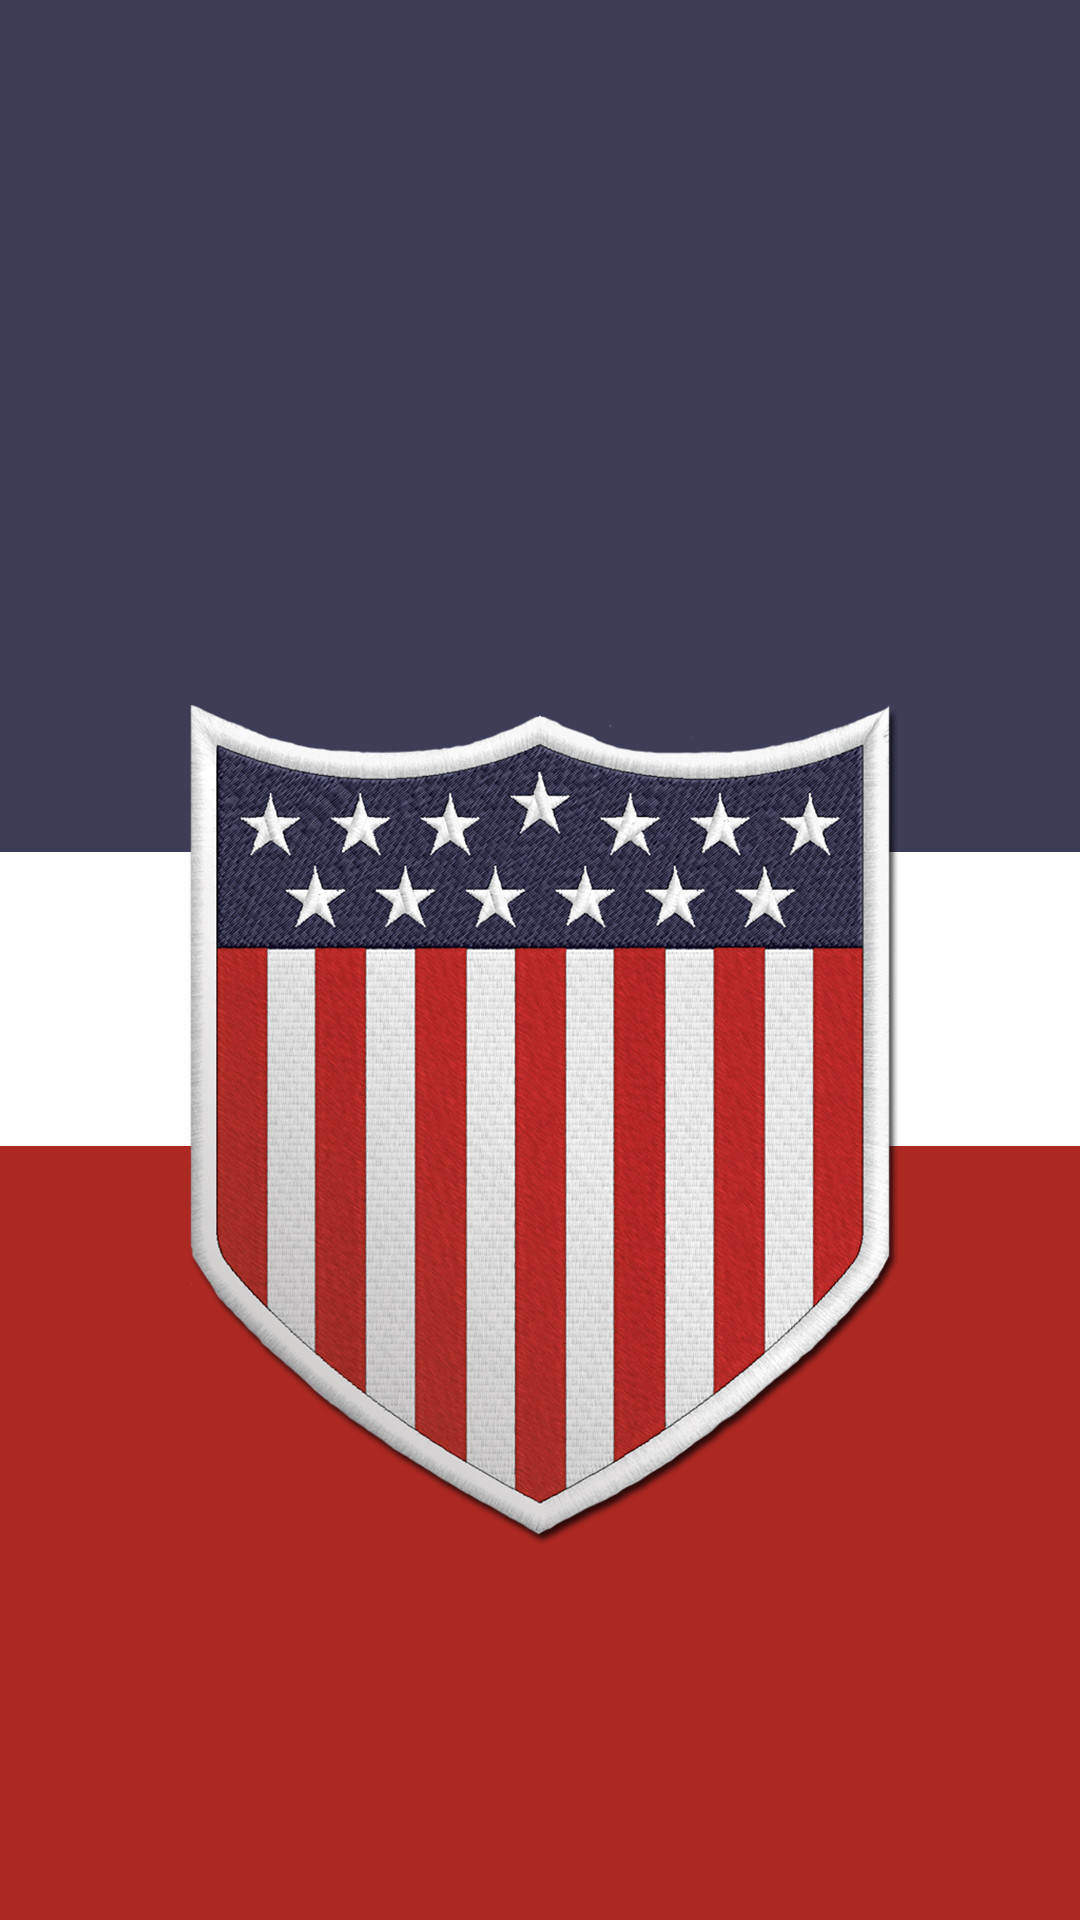 1080x1920 Another US soccer phone wallpaper. Centennial crest this time.